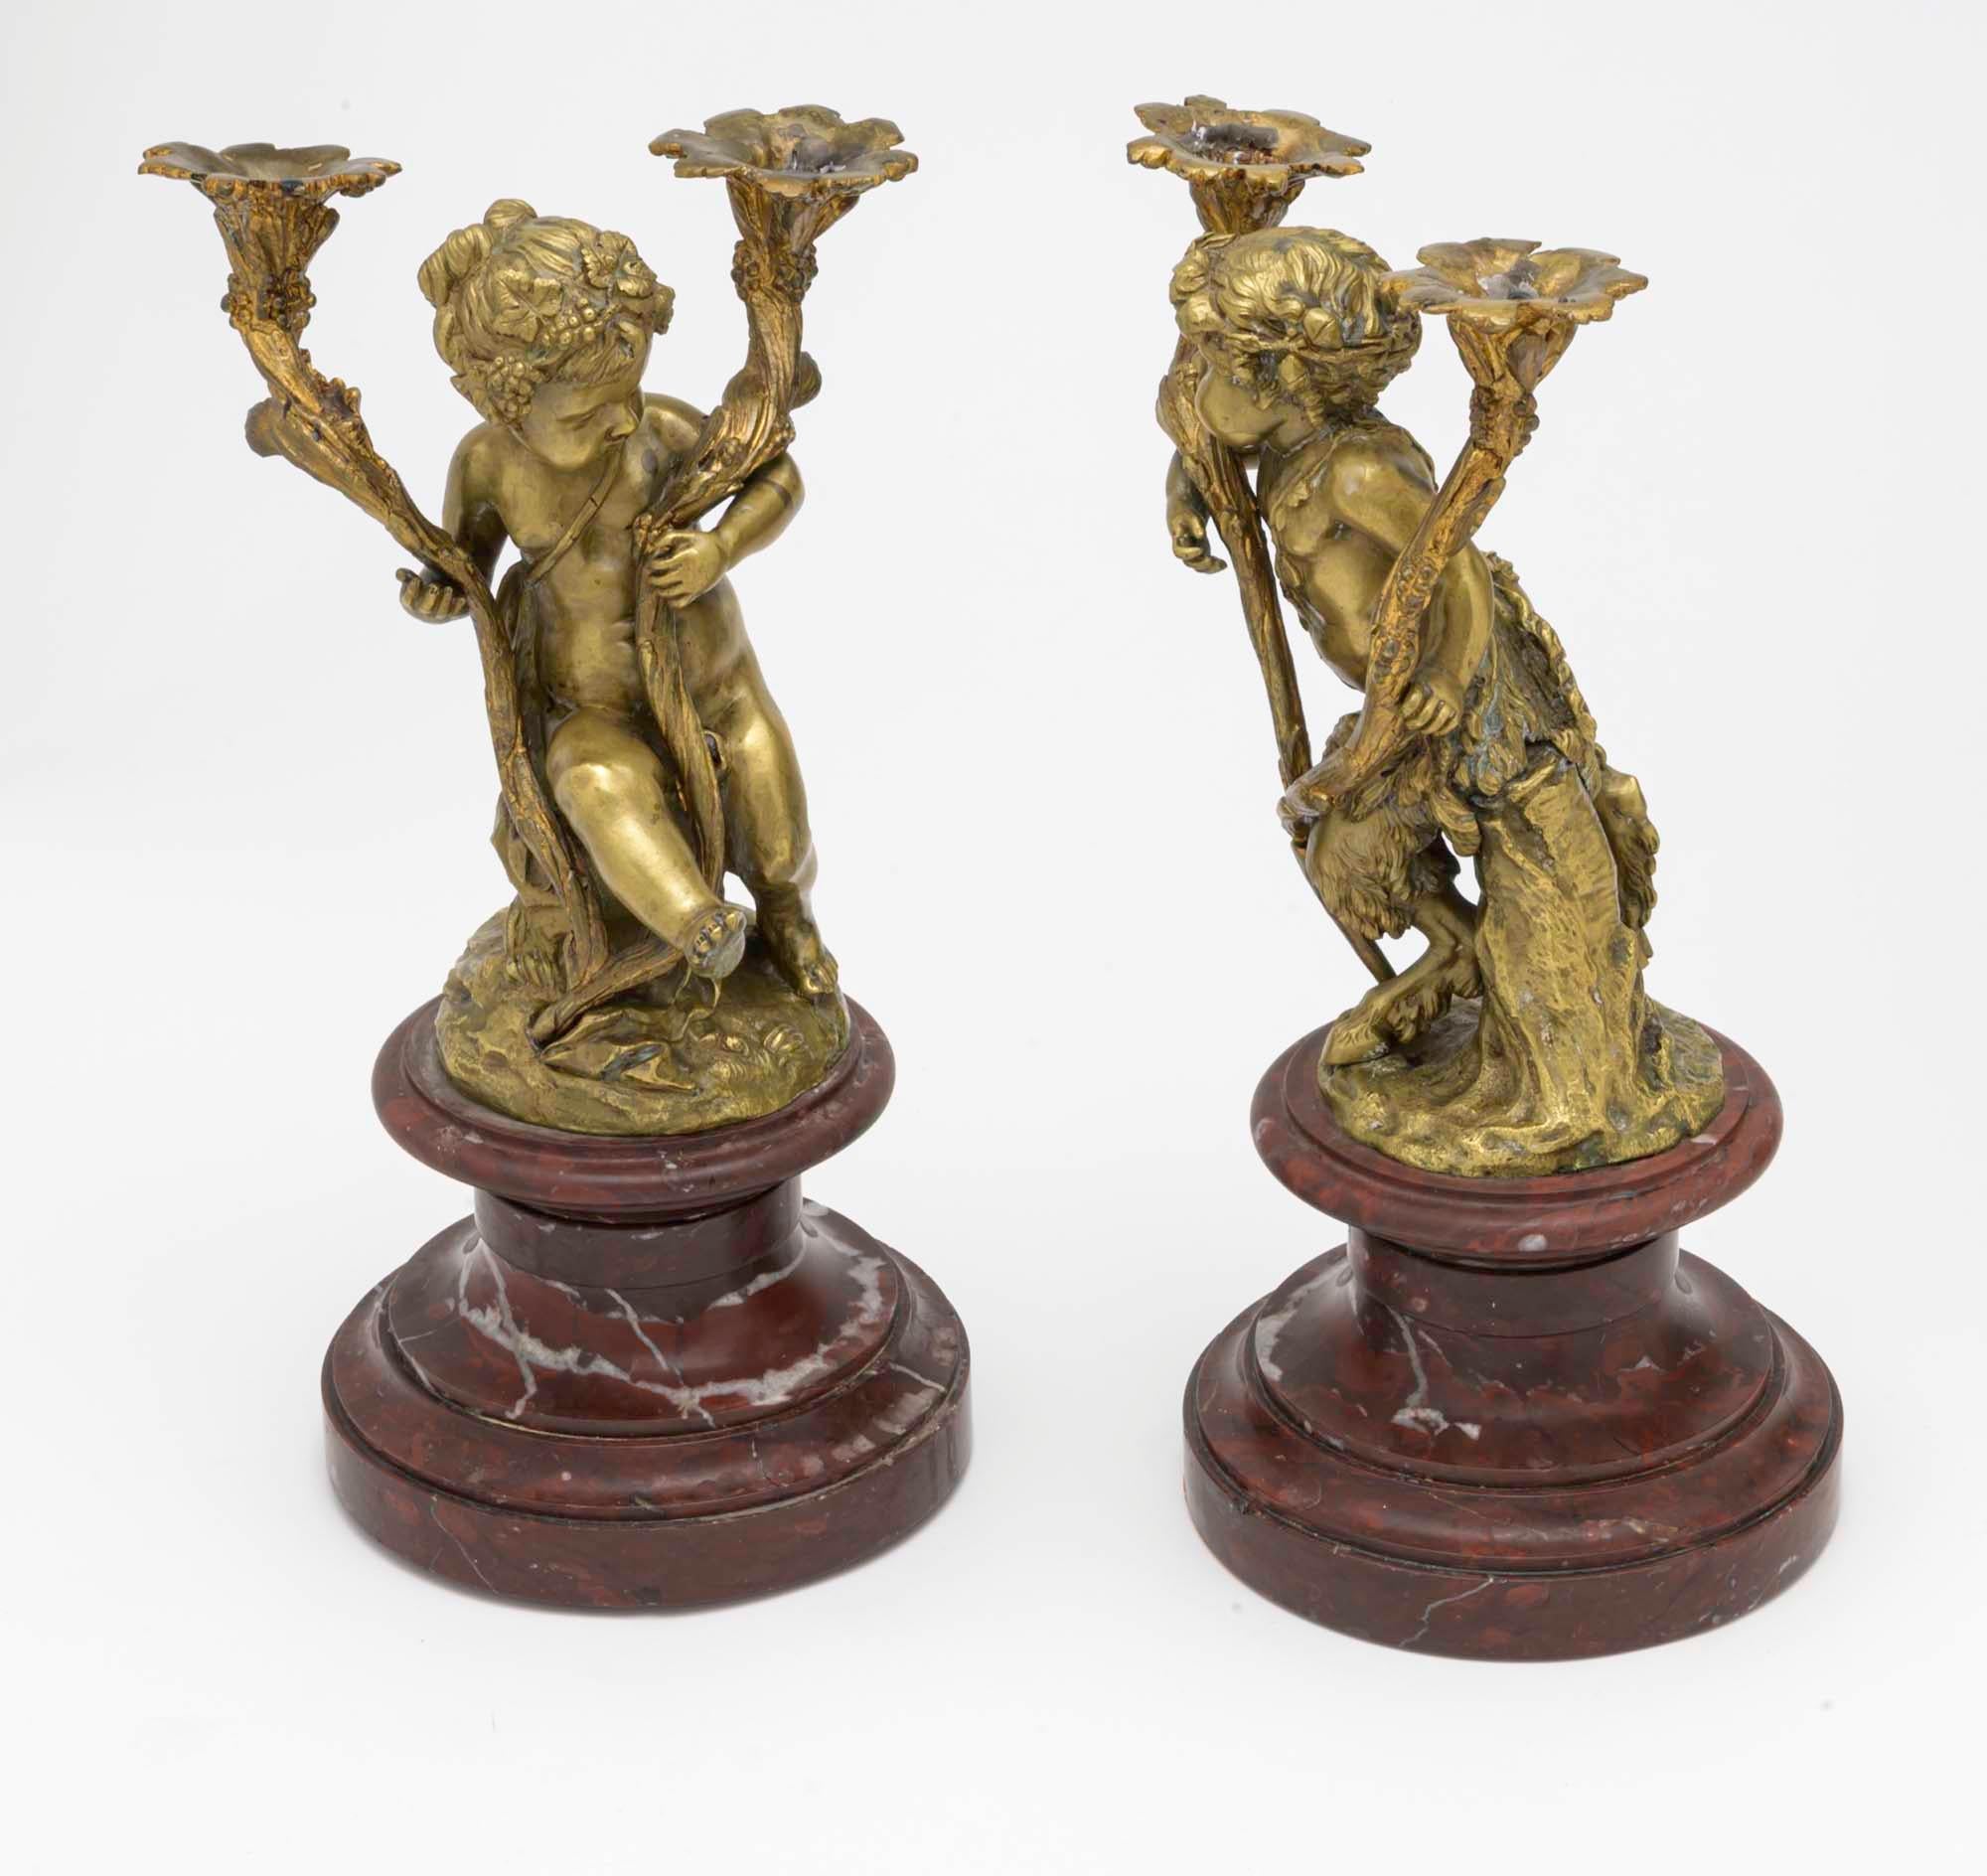 Charming pair of bronze gilt putti and pan candlesticks. They sit on rose colored round marble plinth.
Properly facing each other, holding floral stems for candles. Beautifully executed with superb details.
Approximately 14” in height each.
  